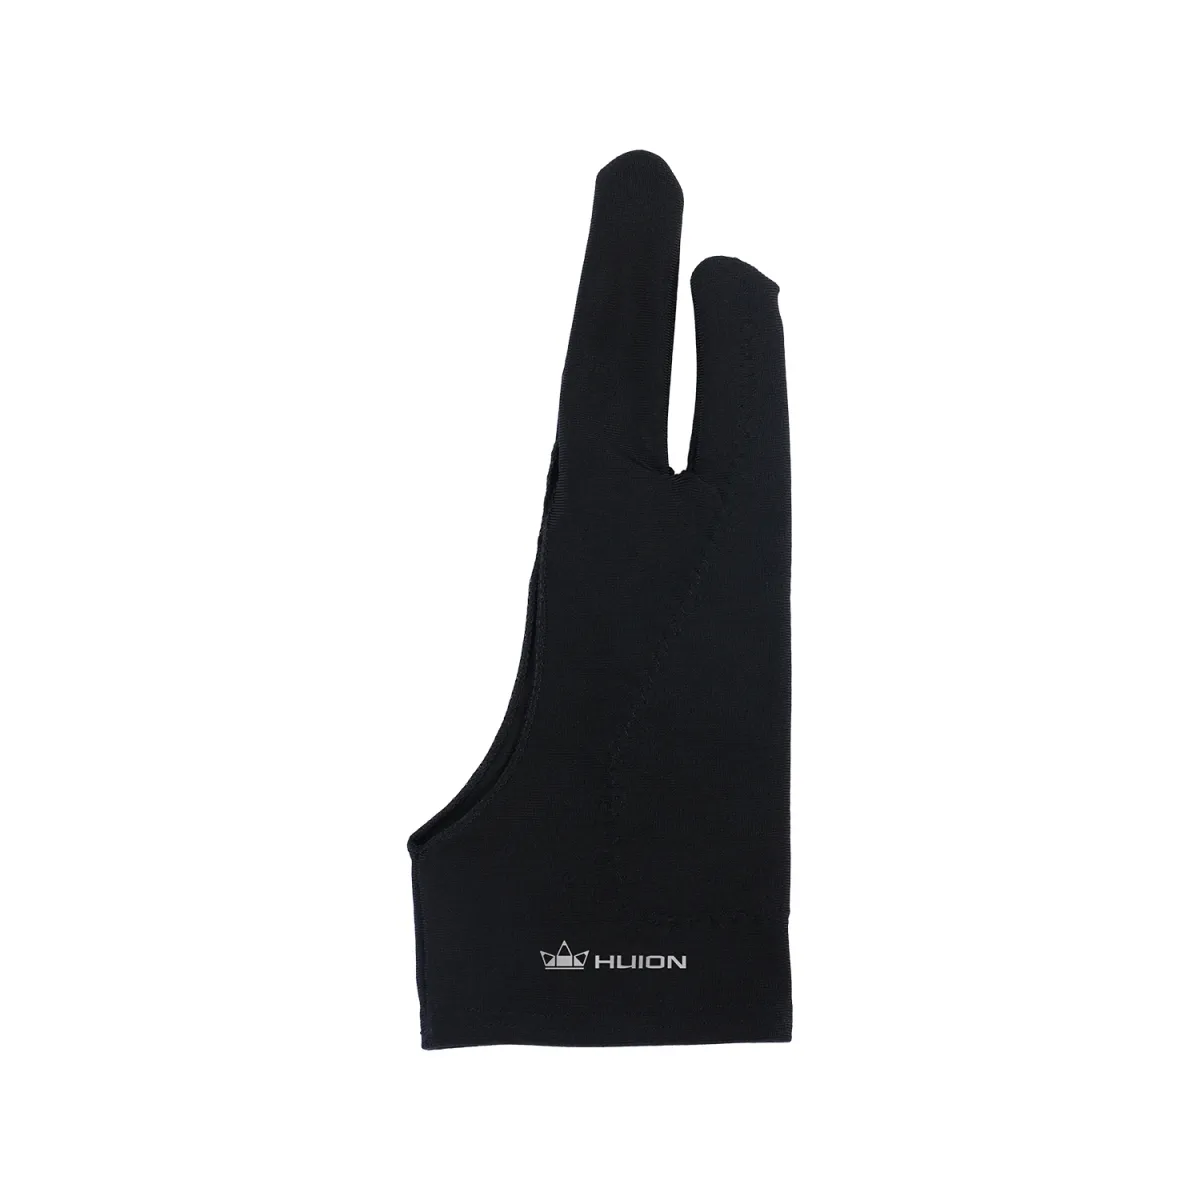 Artist Drawing Tablet Gloves Art Glove for Tracing Board Paper